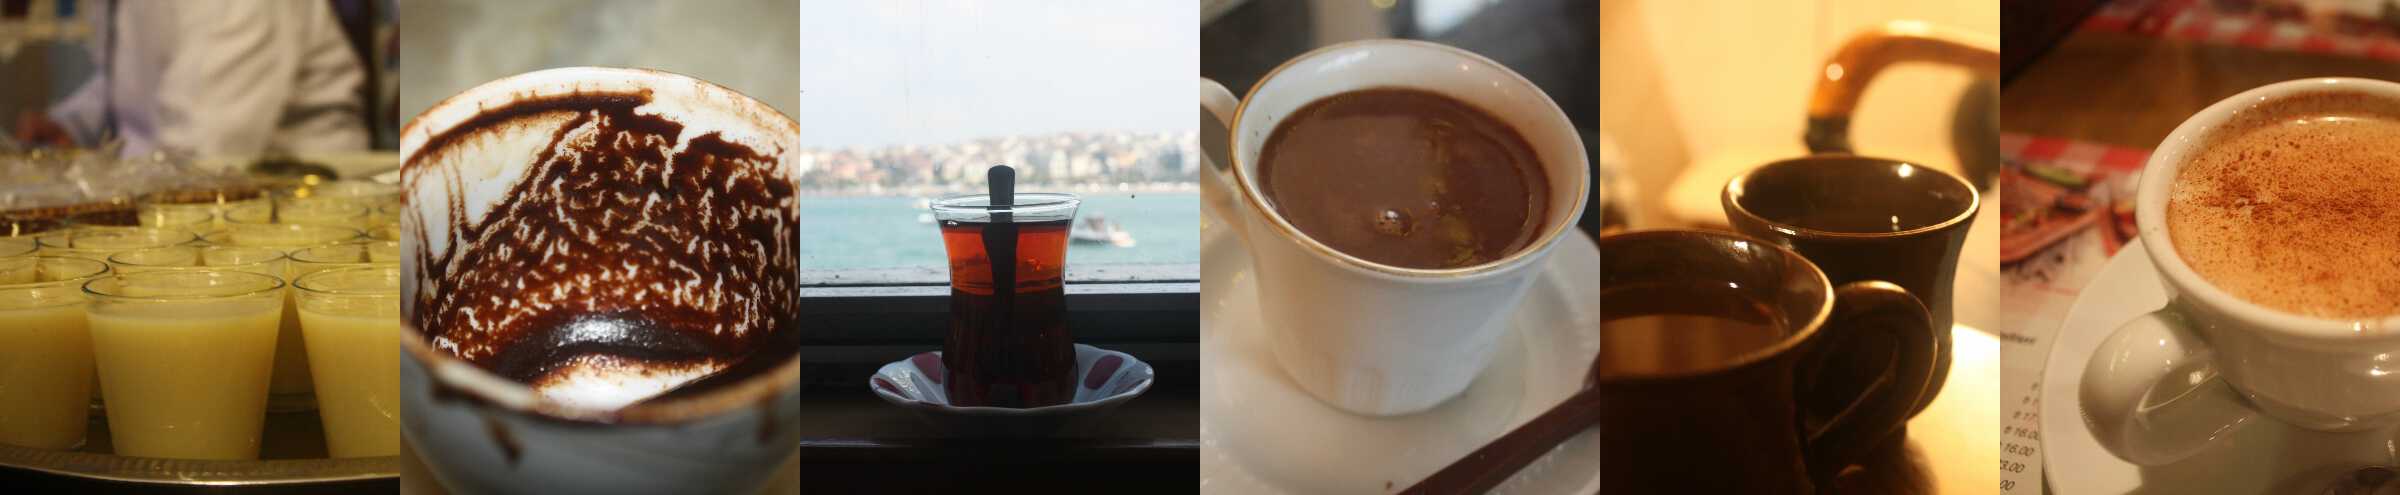 Çays & Guys (Part 1): Exploring winter drinks and online dating in Istanbul